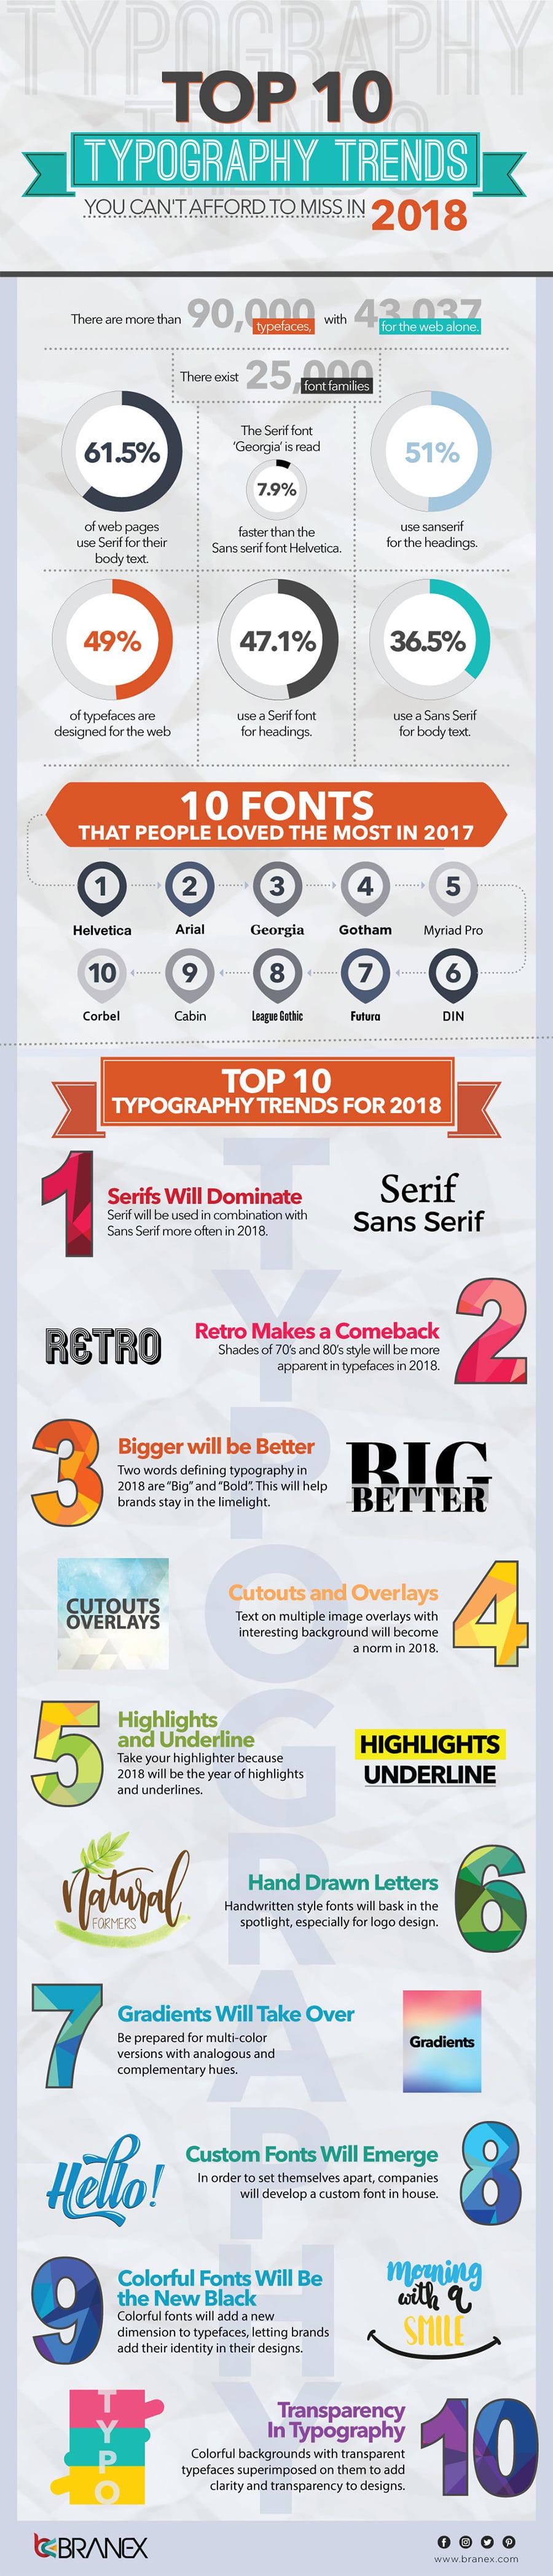 Design: 10 Typography Trends Taking Over 2018